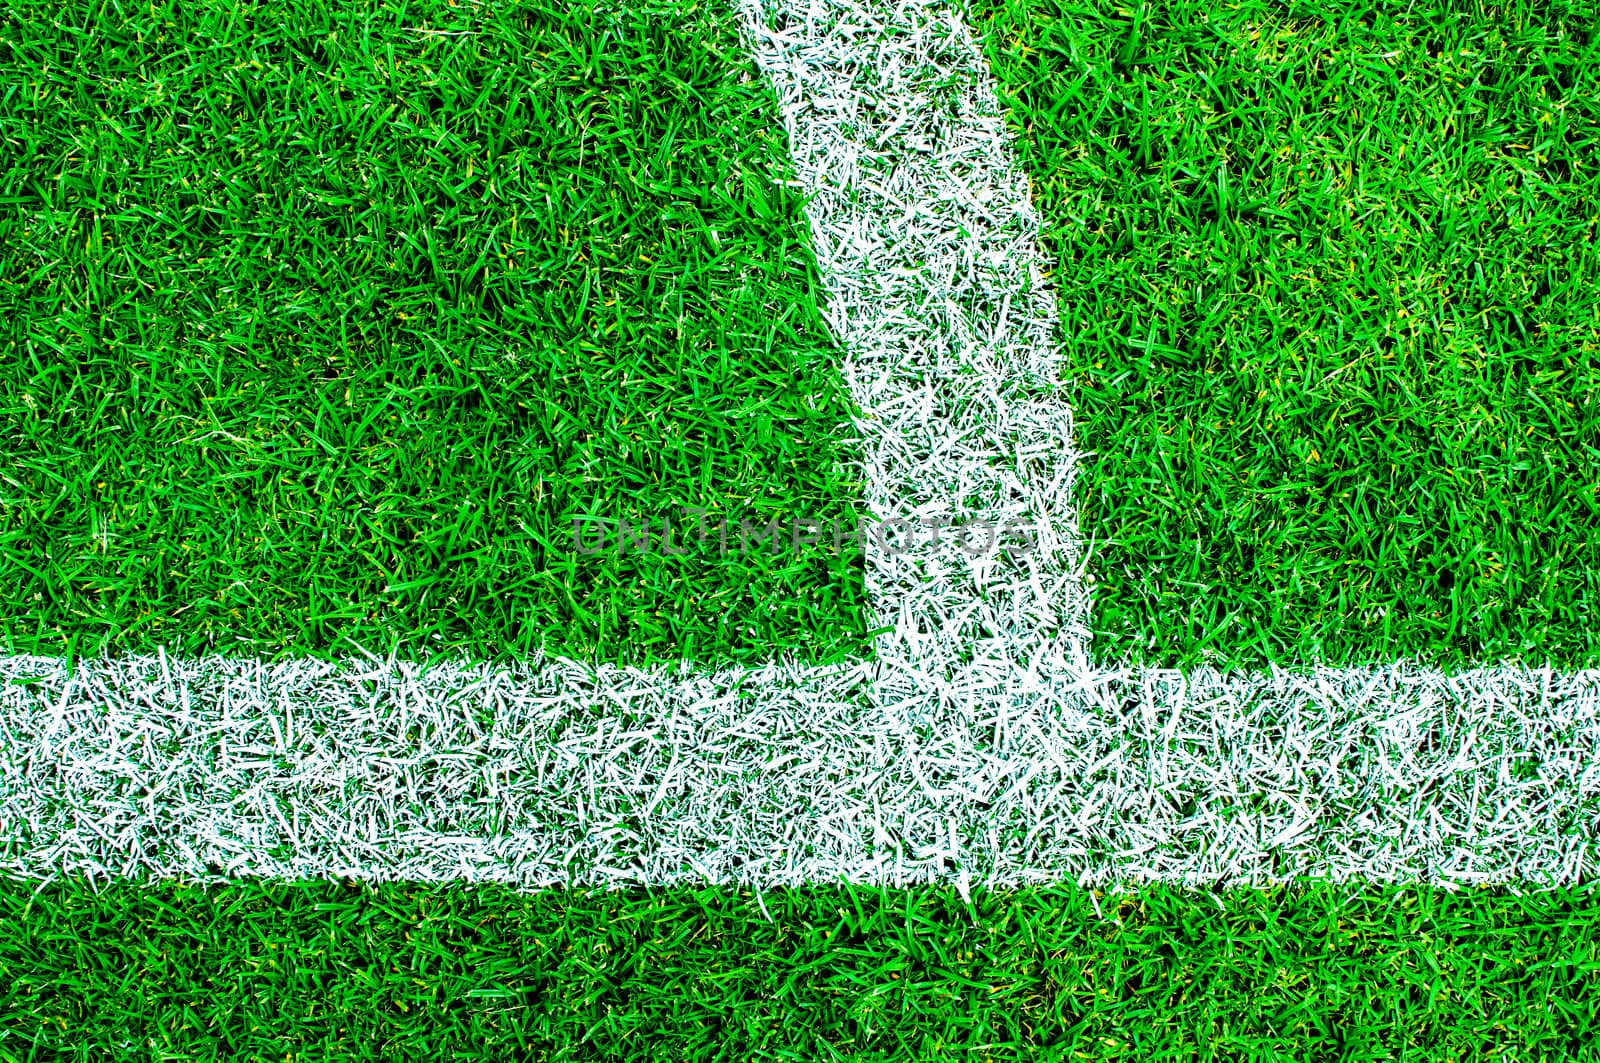 White line on the green soccer field by TanawatPontchour